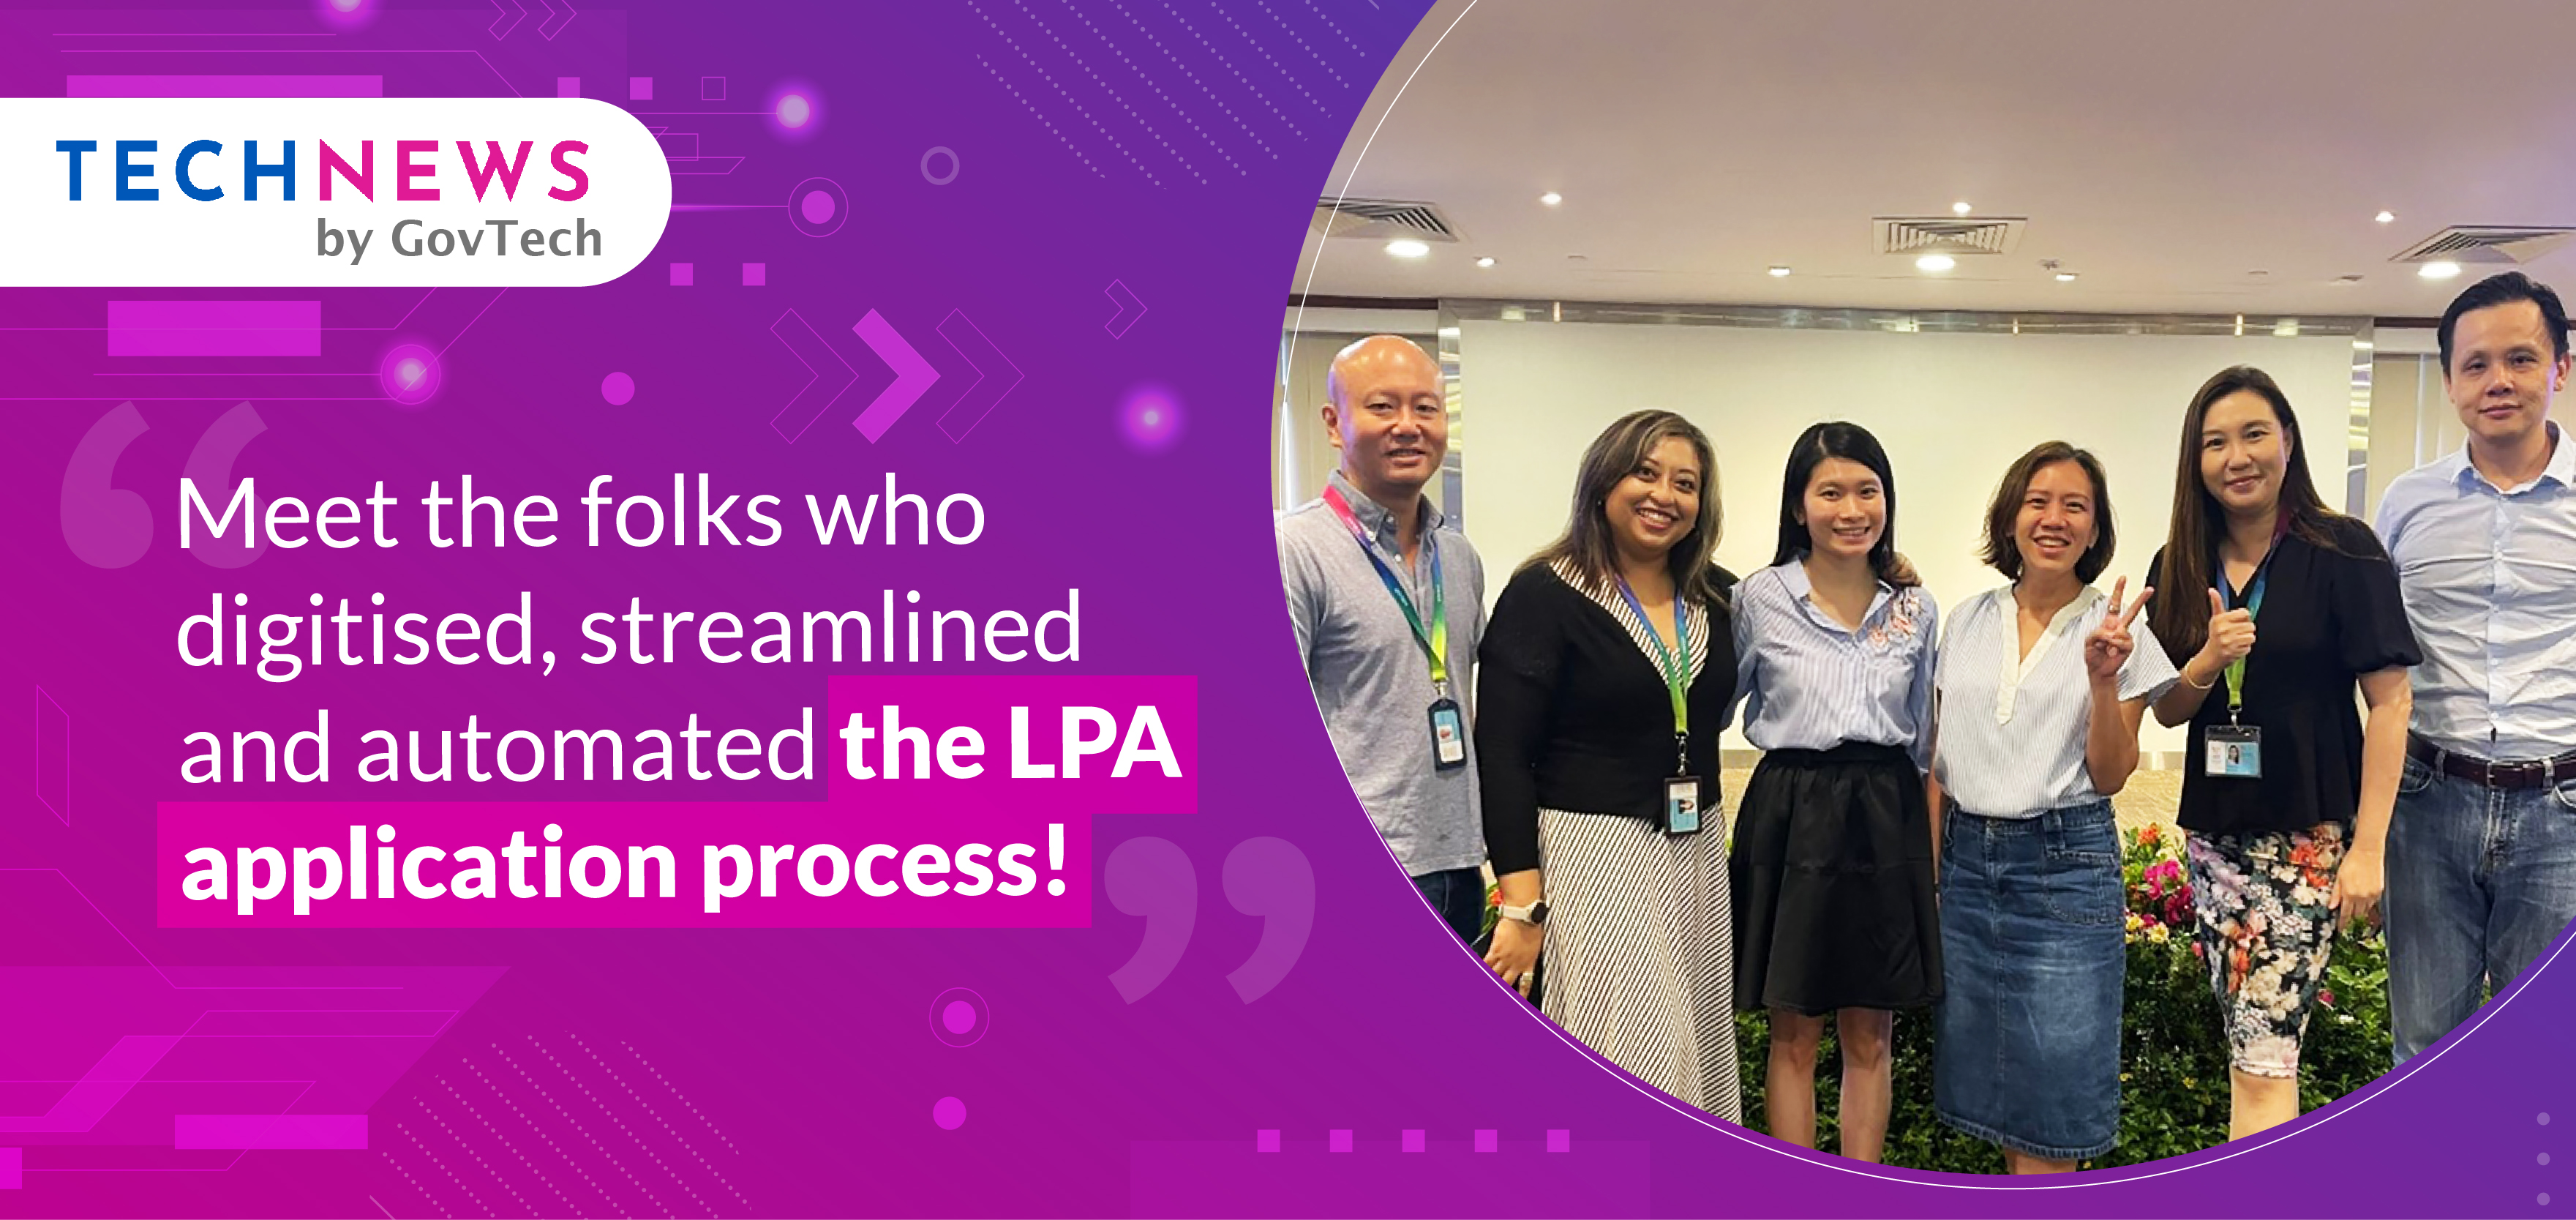 The folks who streamlined the LPA application proceess